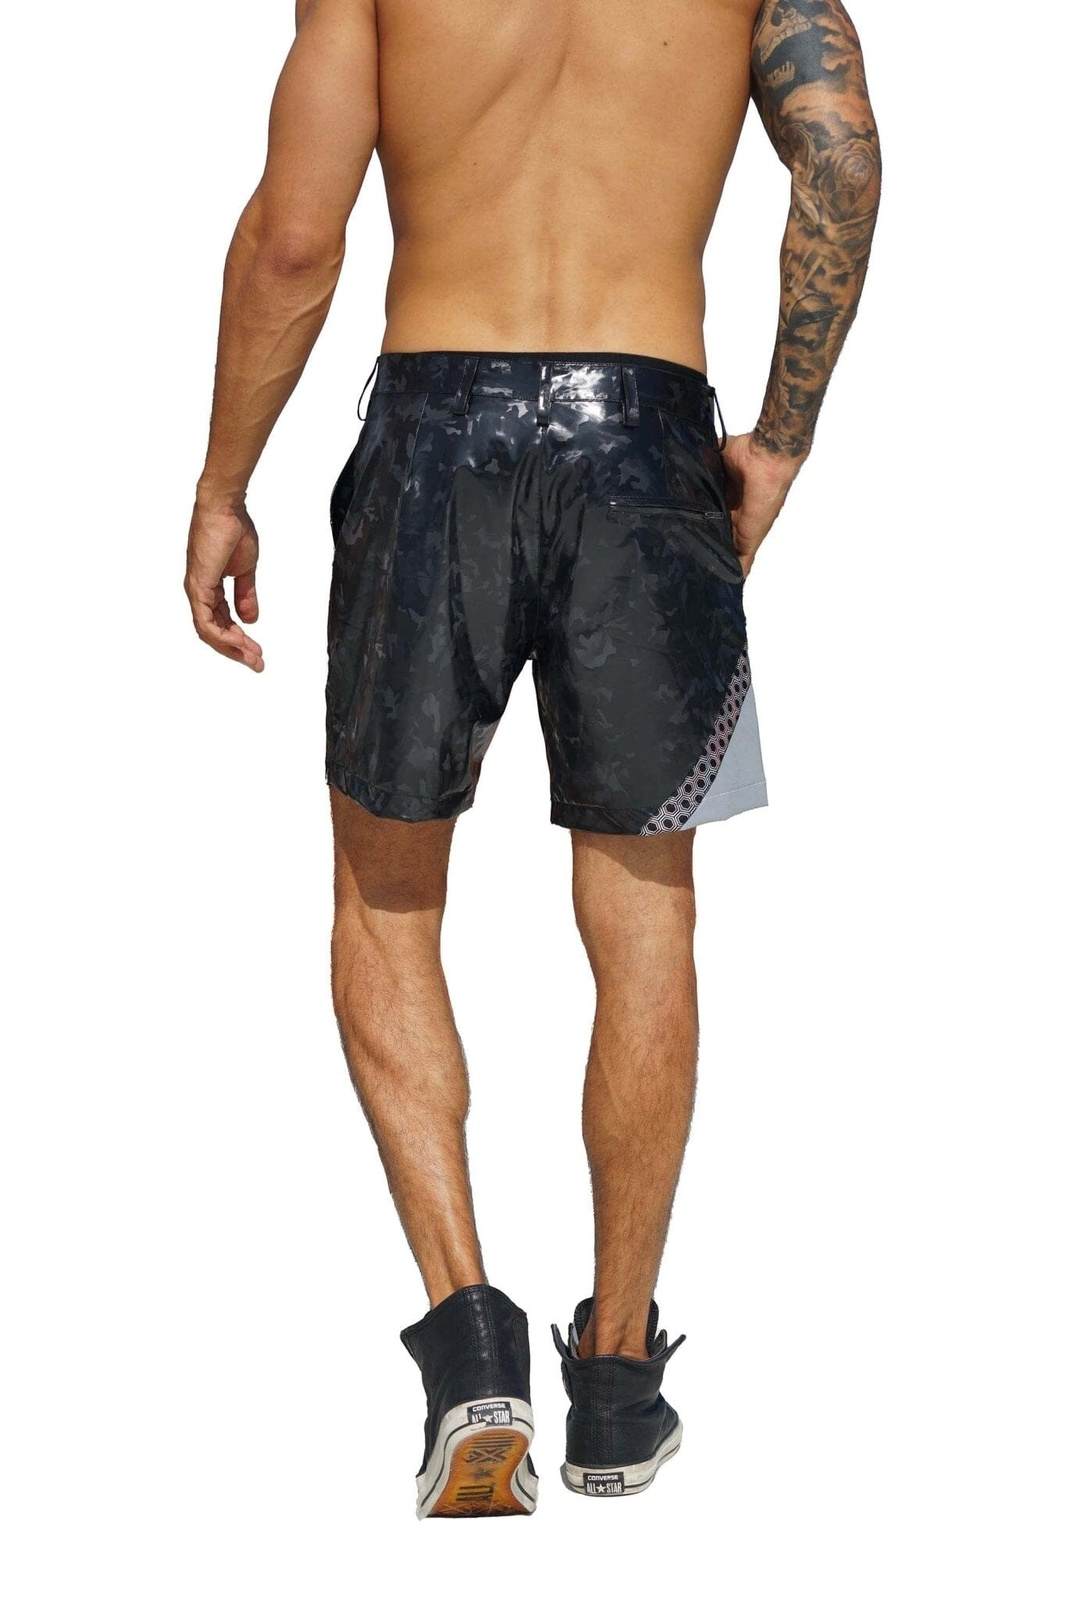 Mens Black Camo Shorts with reflective panel from Love Khaos Festival Clothing & Streetwear brand